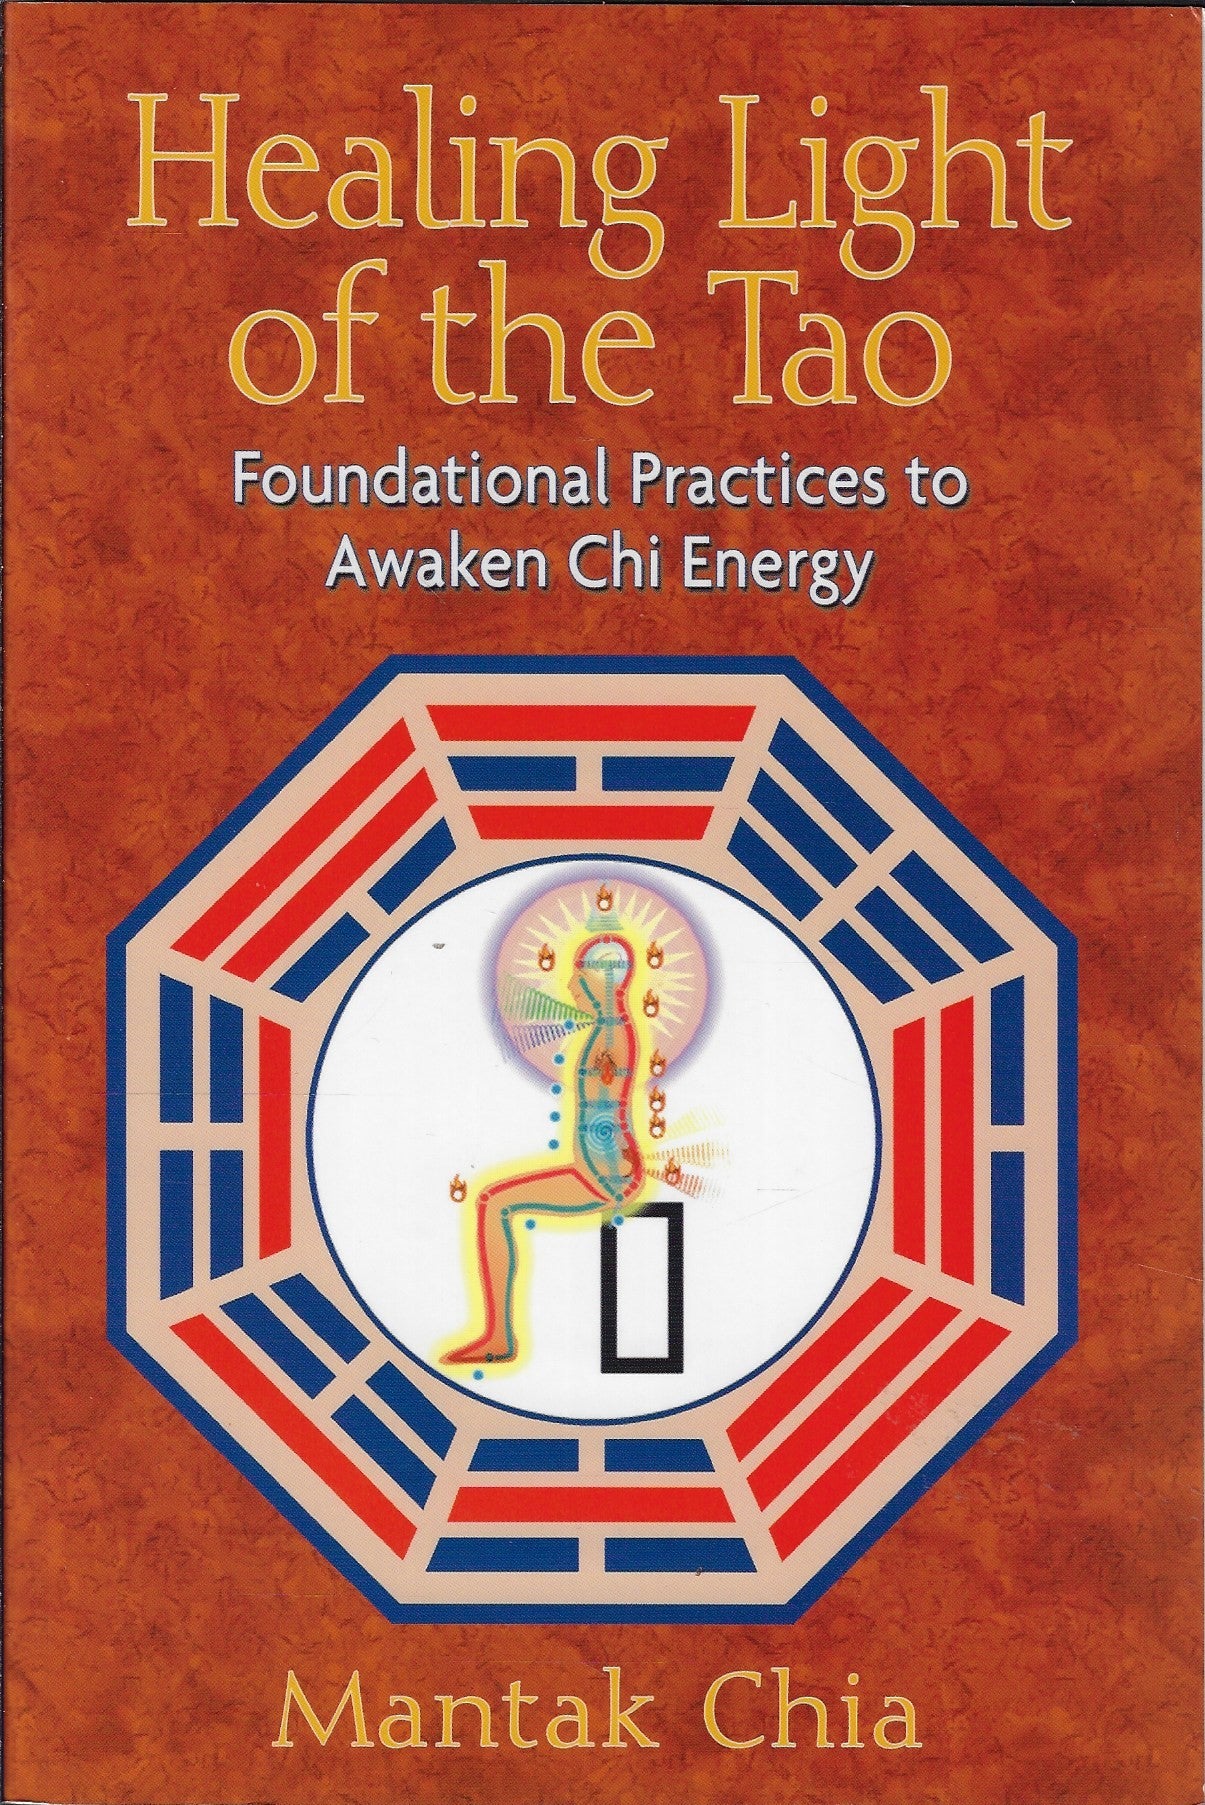 Healing Light of the Tao / Foundational Practices to Awaken Chi Energy